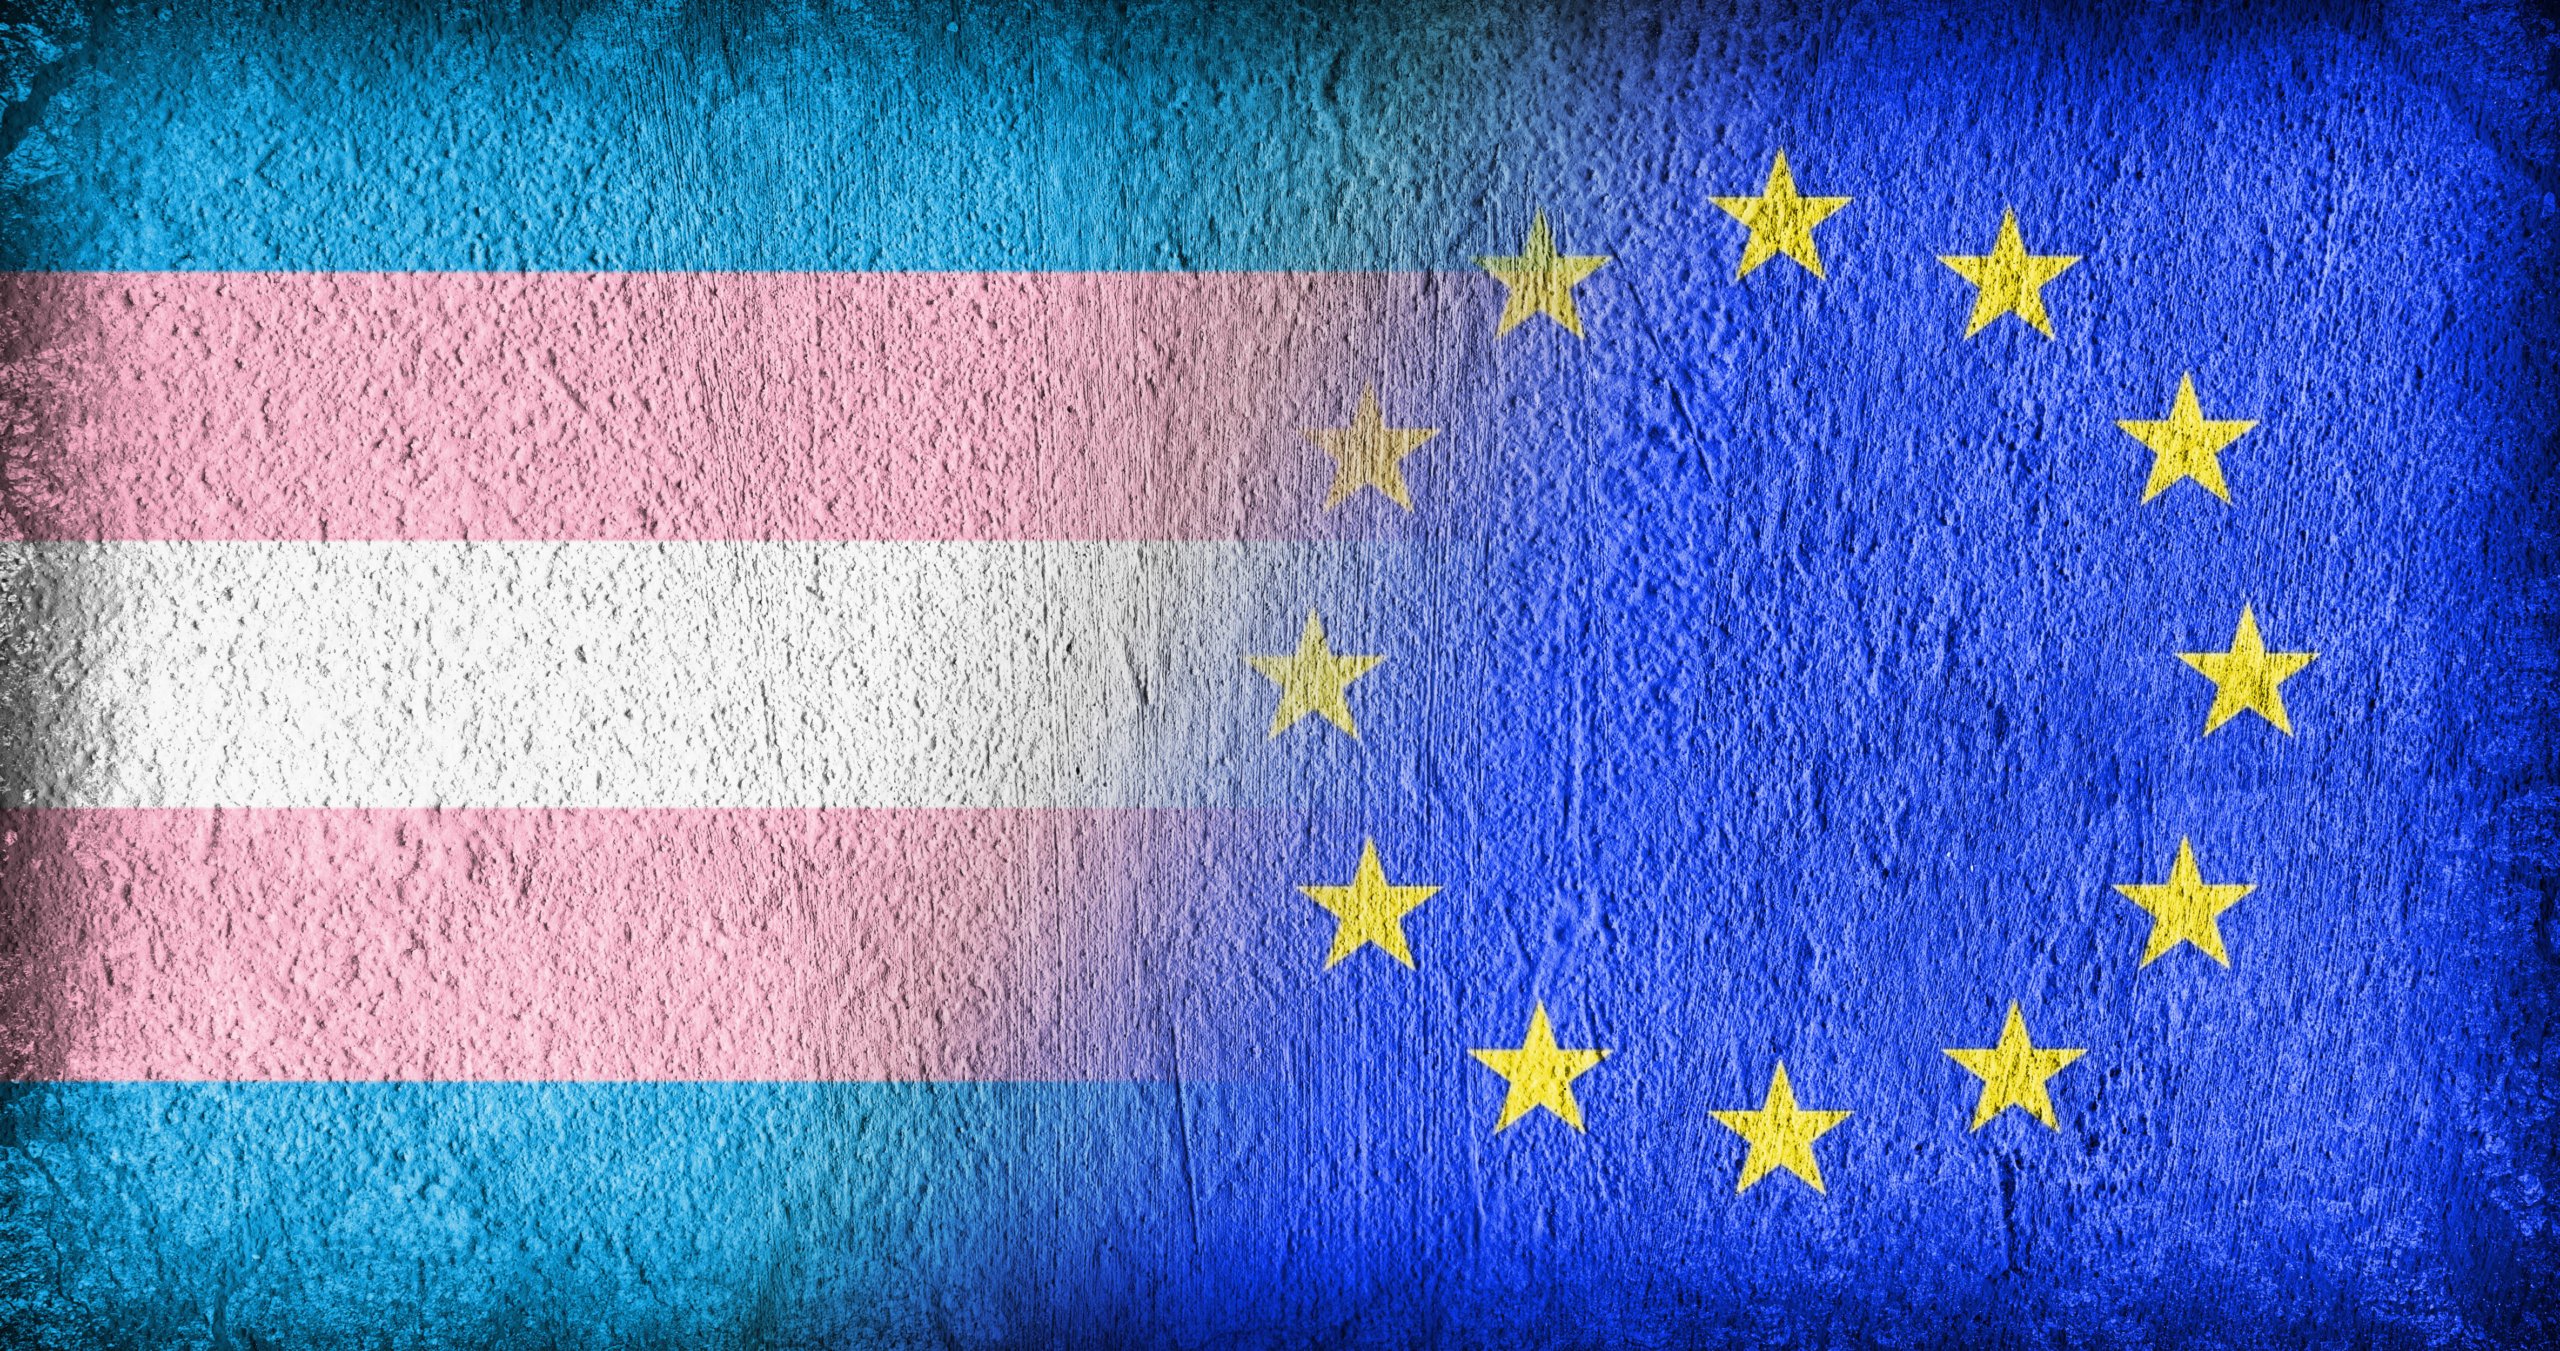 Trans Pride and the EU, flags painted on cracked concrete